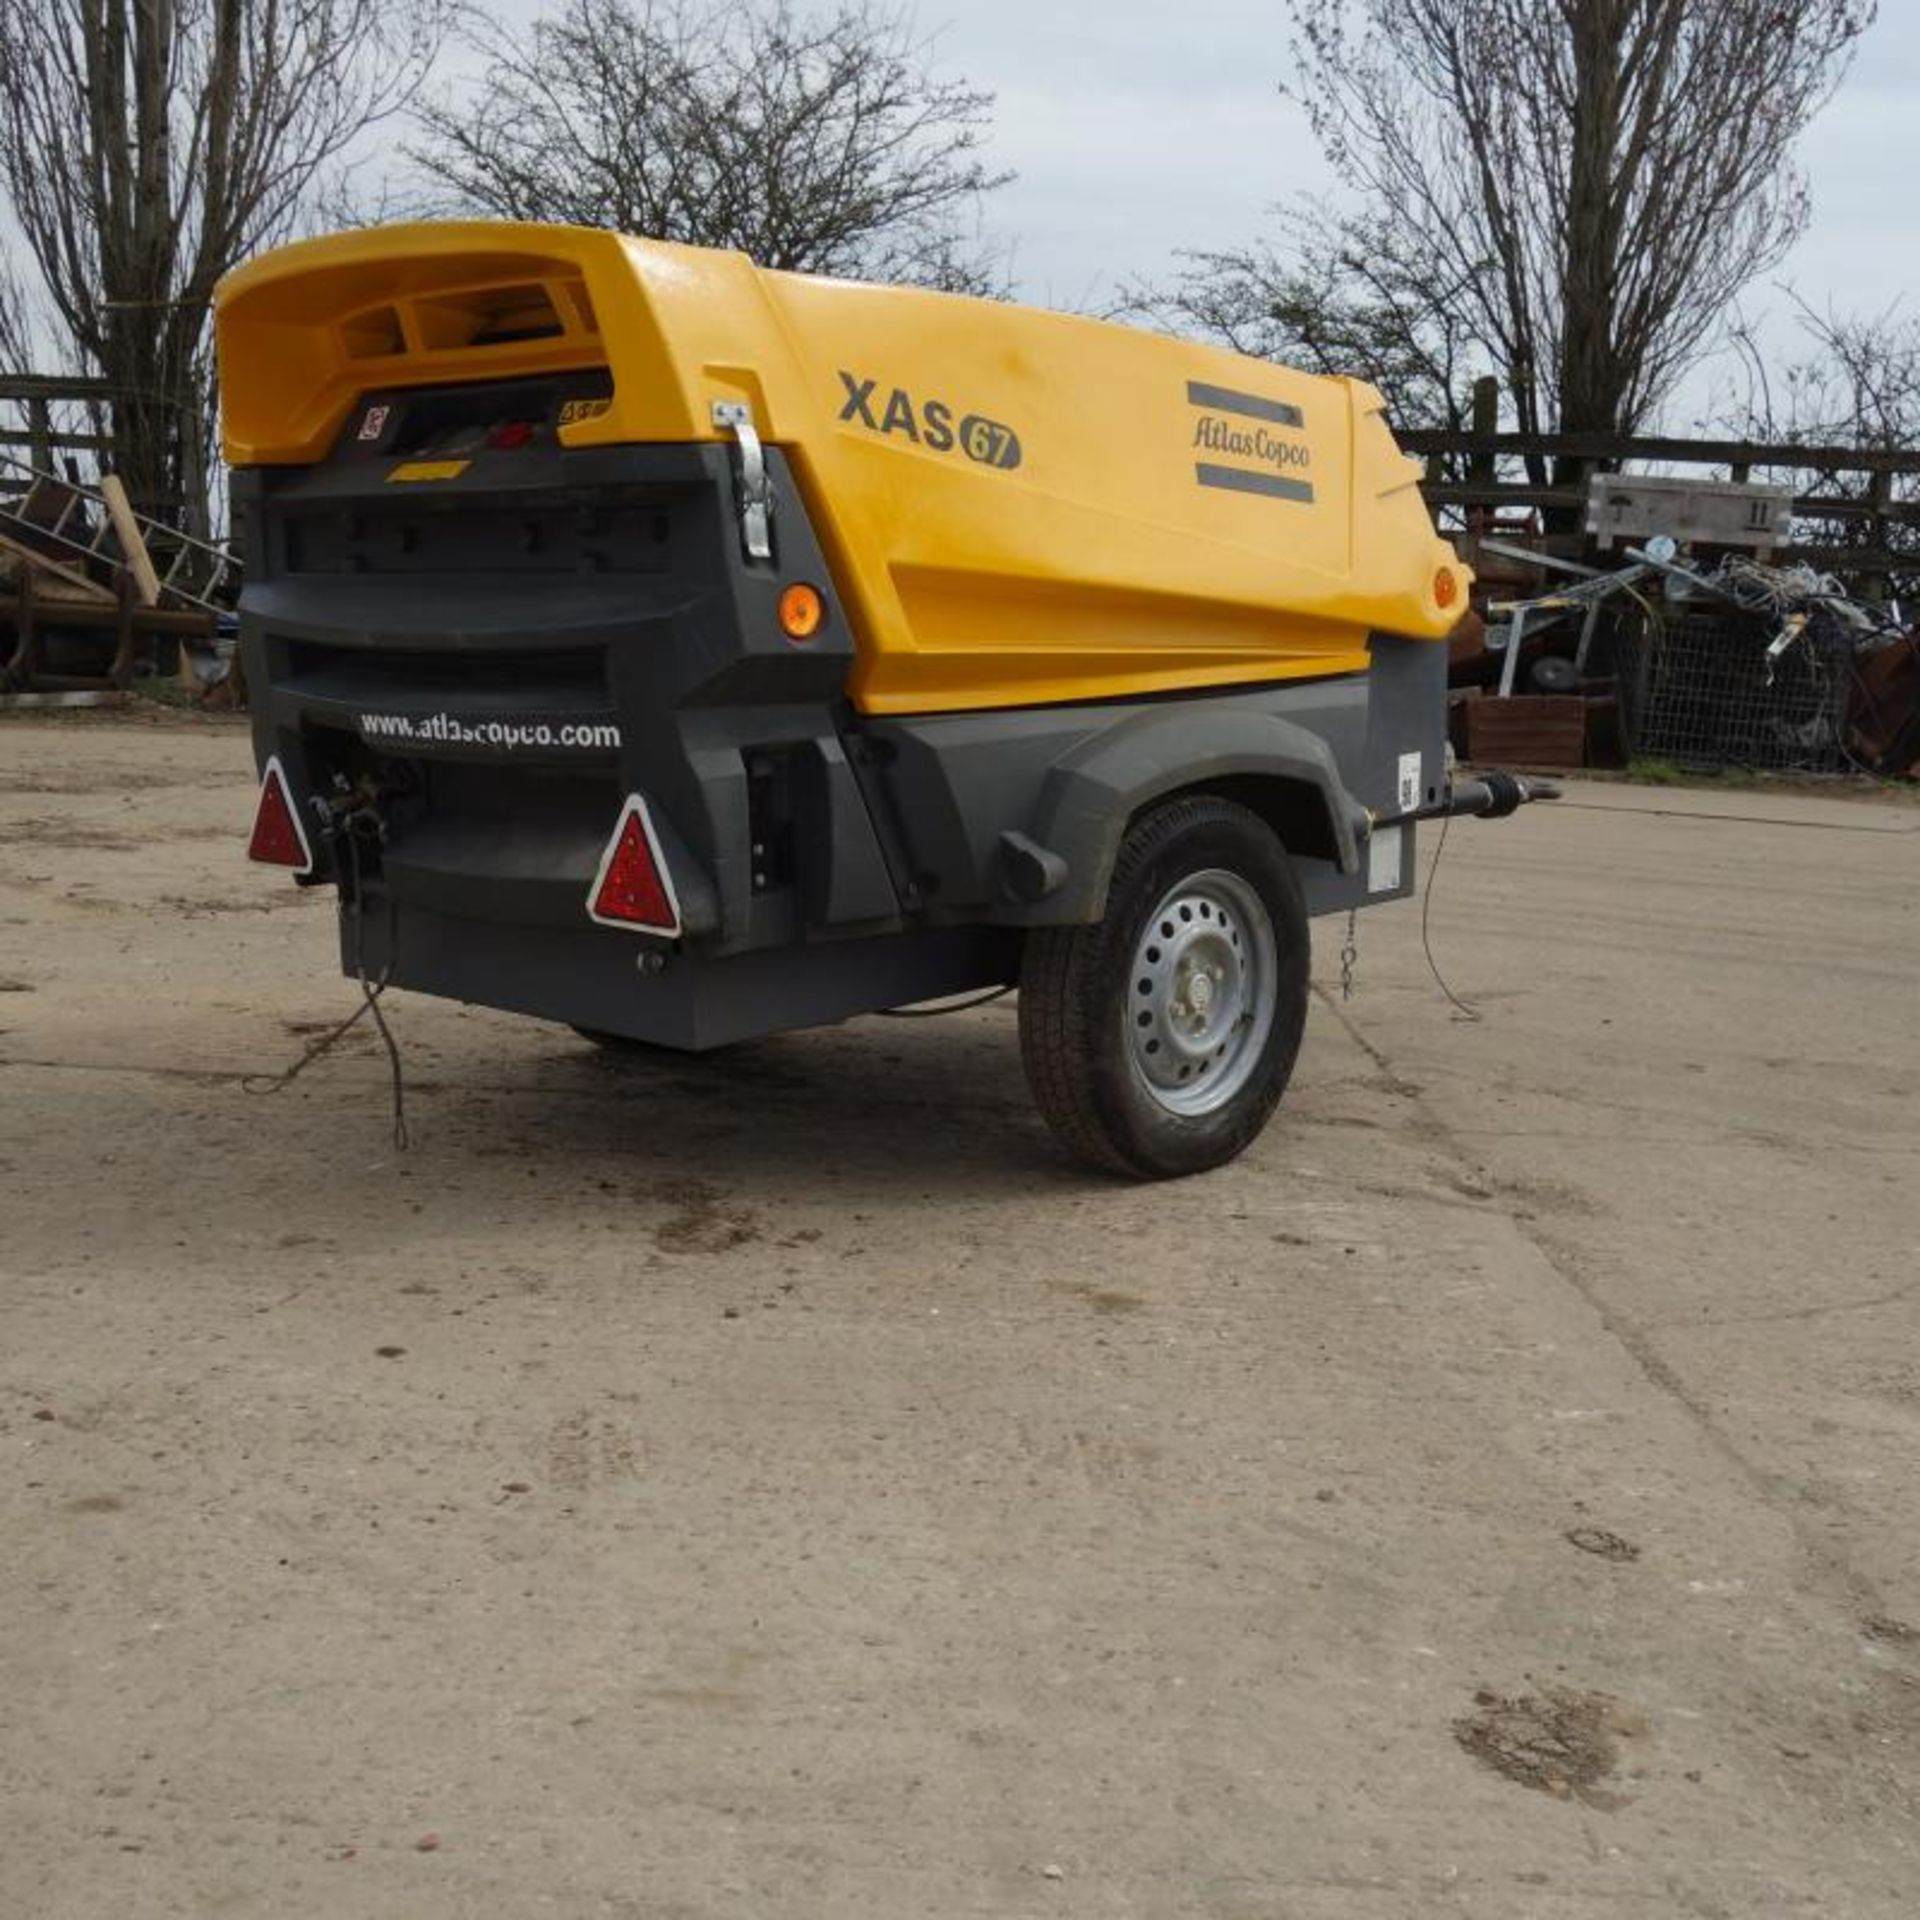 2015 Atlas Copco Xas 67 Compressor, 936 Hours From New - Image 3 of 6